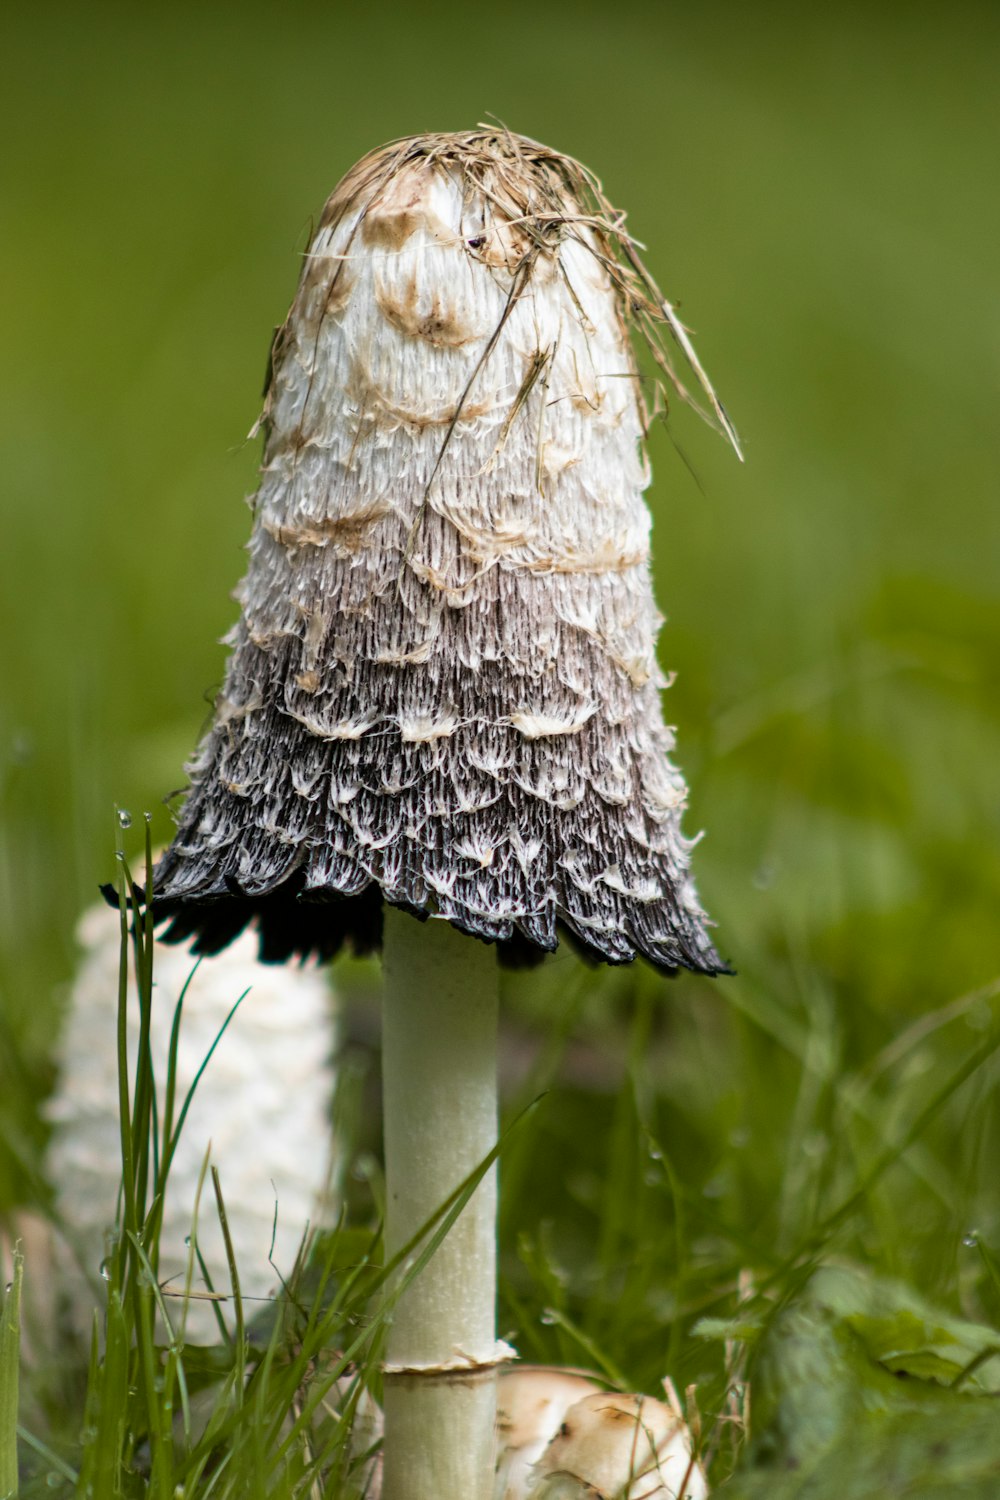 white and black mushroom in close up photography